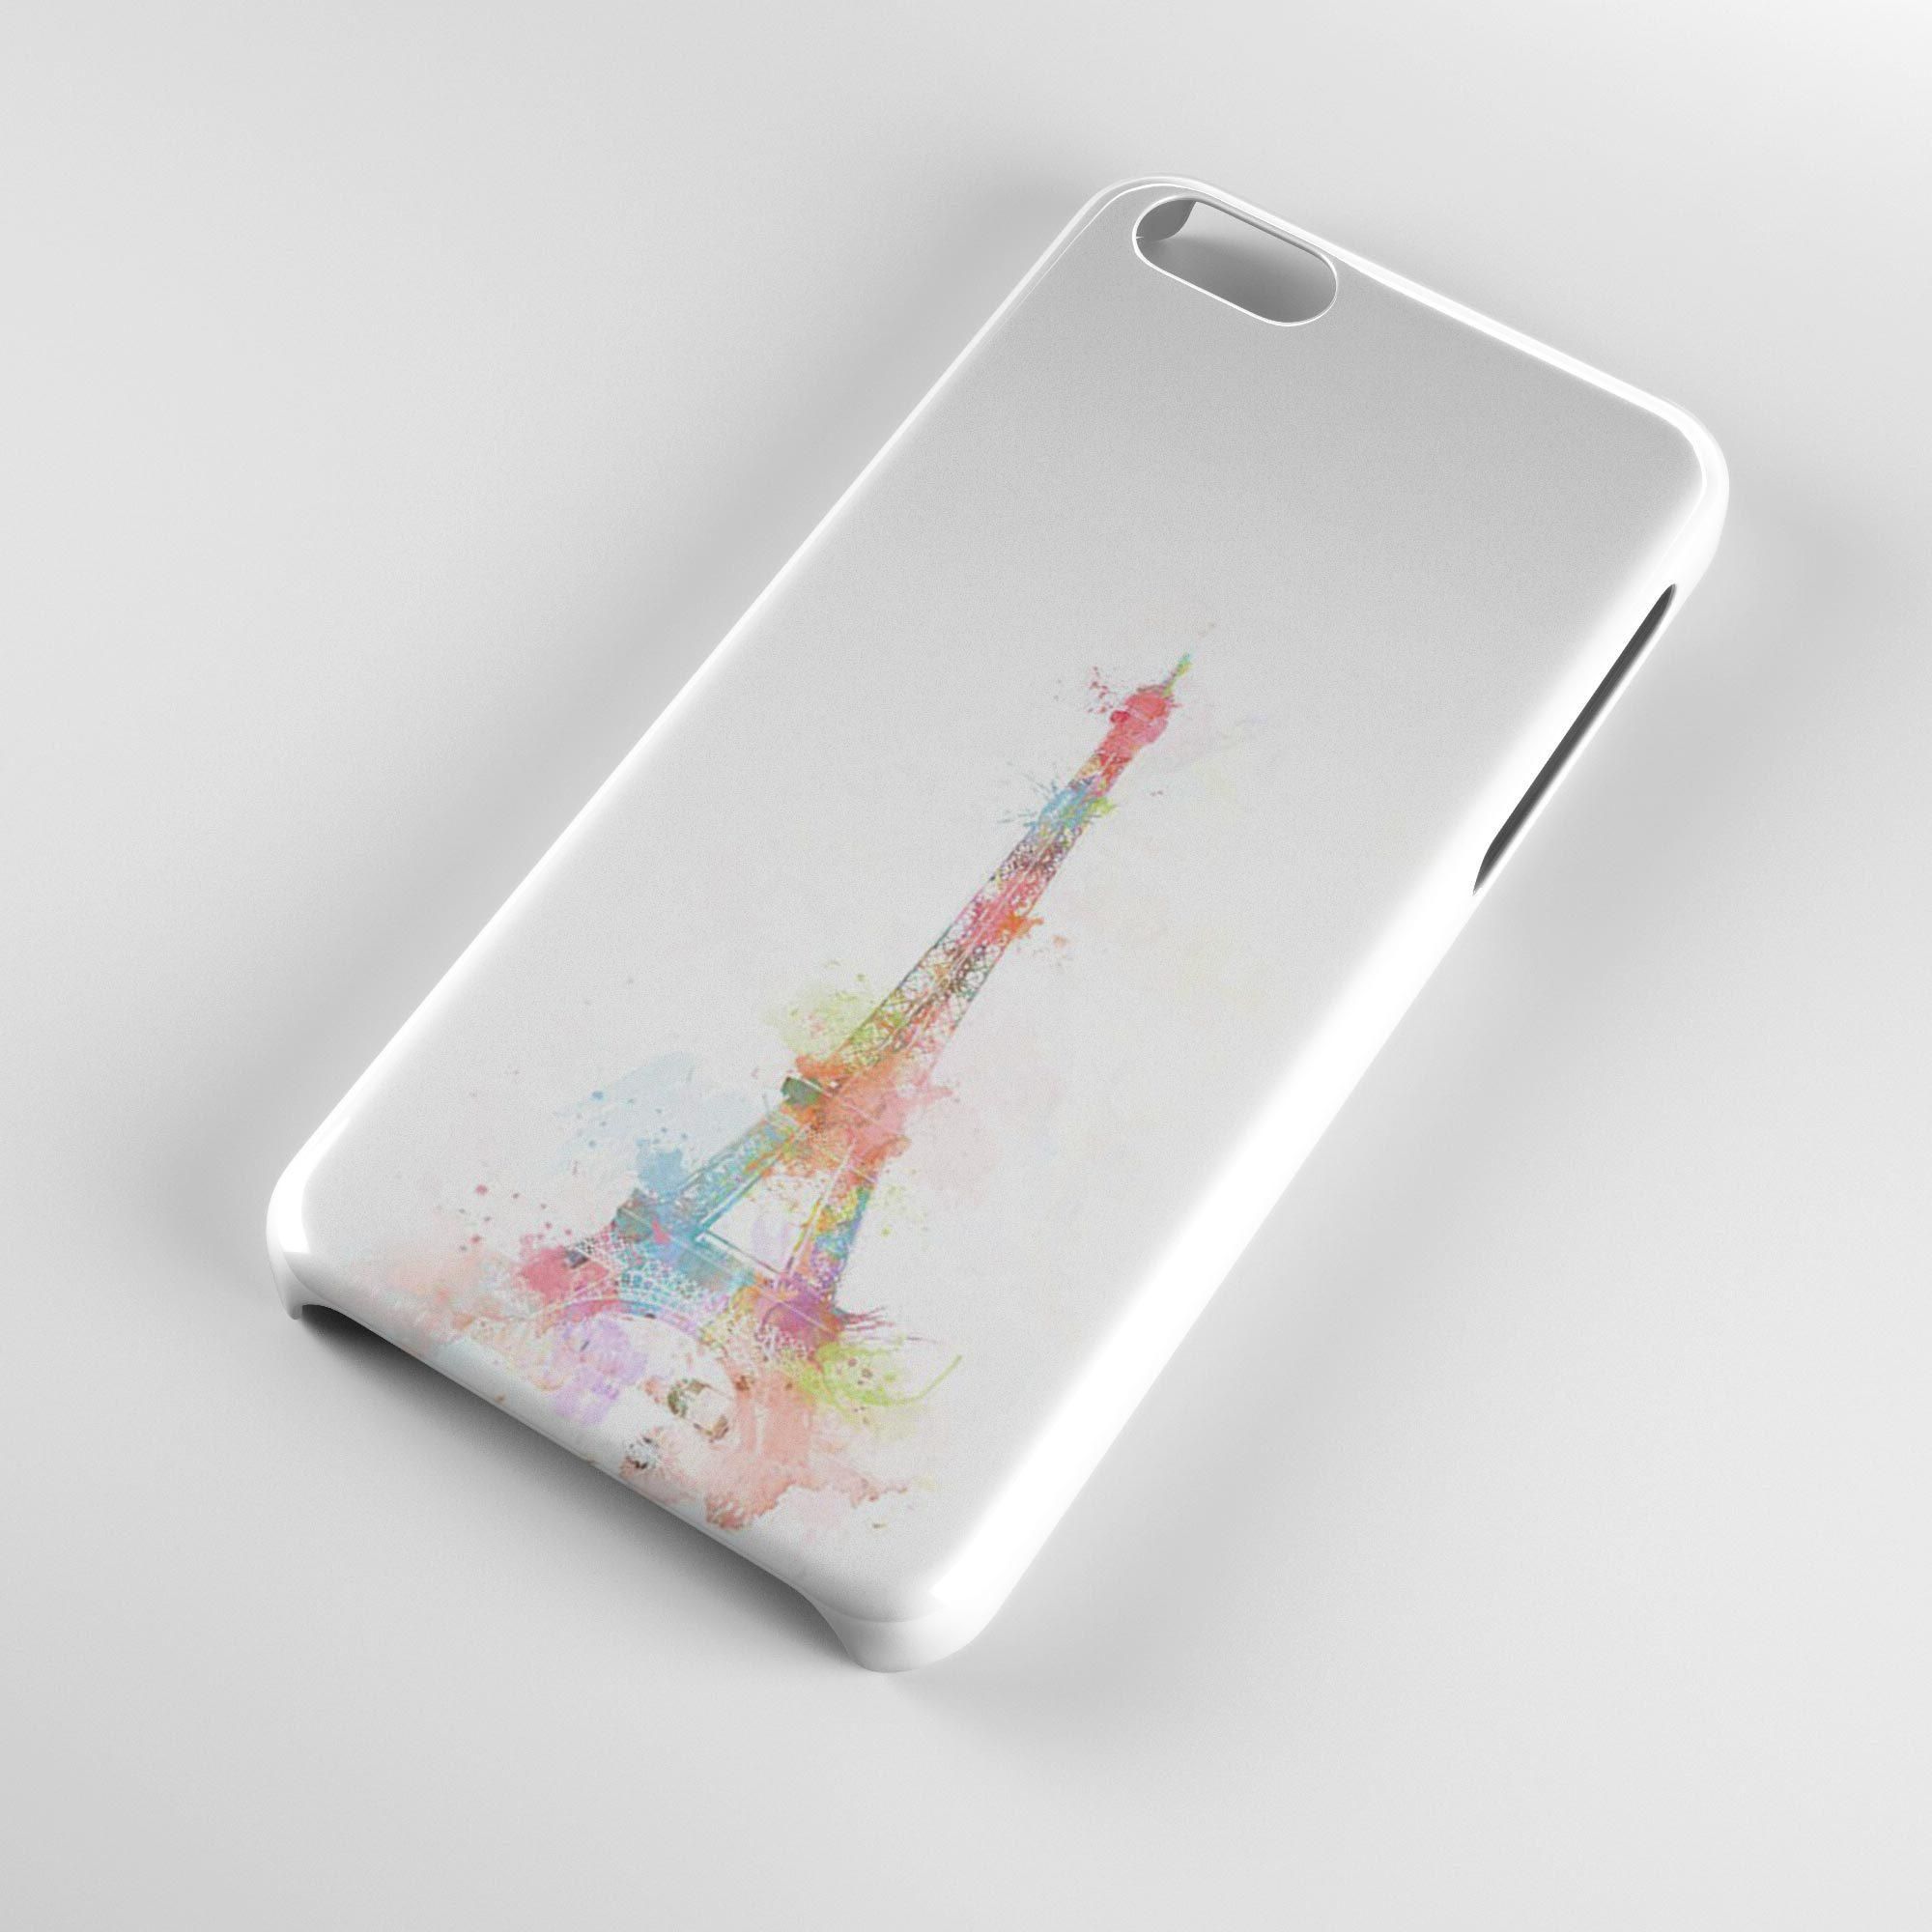 The Eifel Tower Phone Case Water Painting 3D Full Back & Side Phone Case Protector Cover for Samsung Galaxy Alpha G850